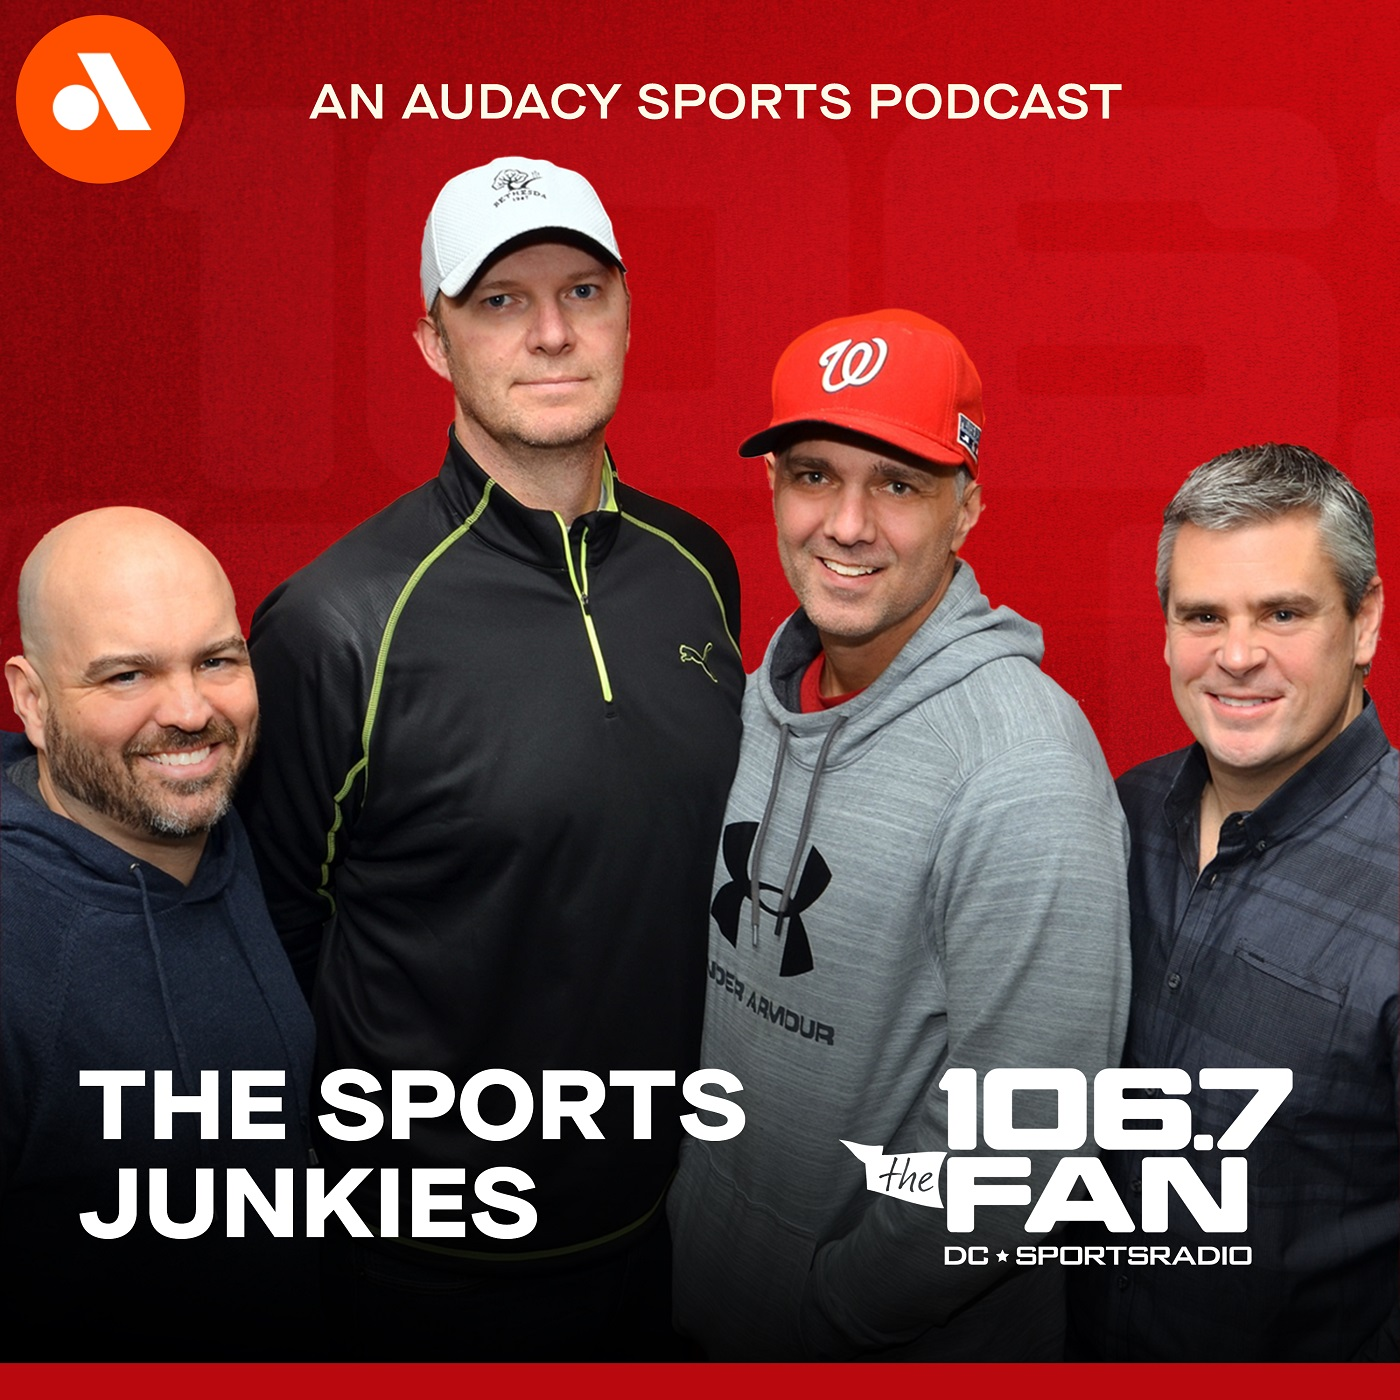 8/23 Hour 3- Dan Marino, JP's party over the weekend, Jack Nicklaus